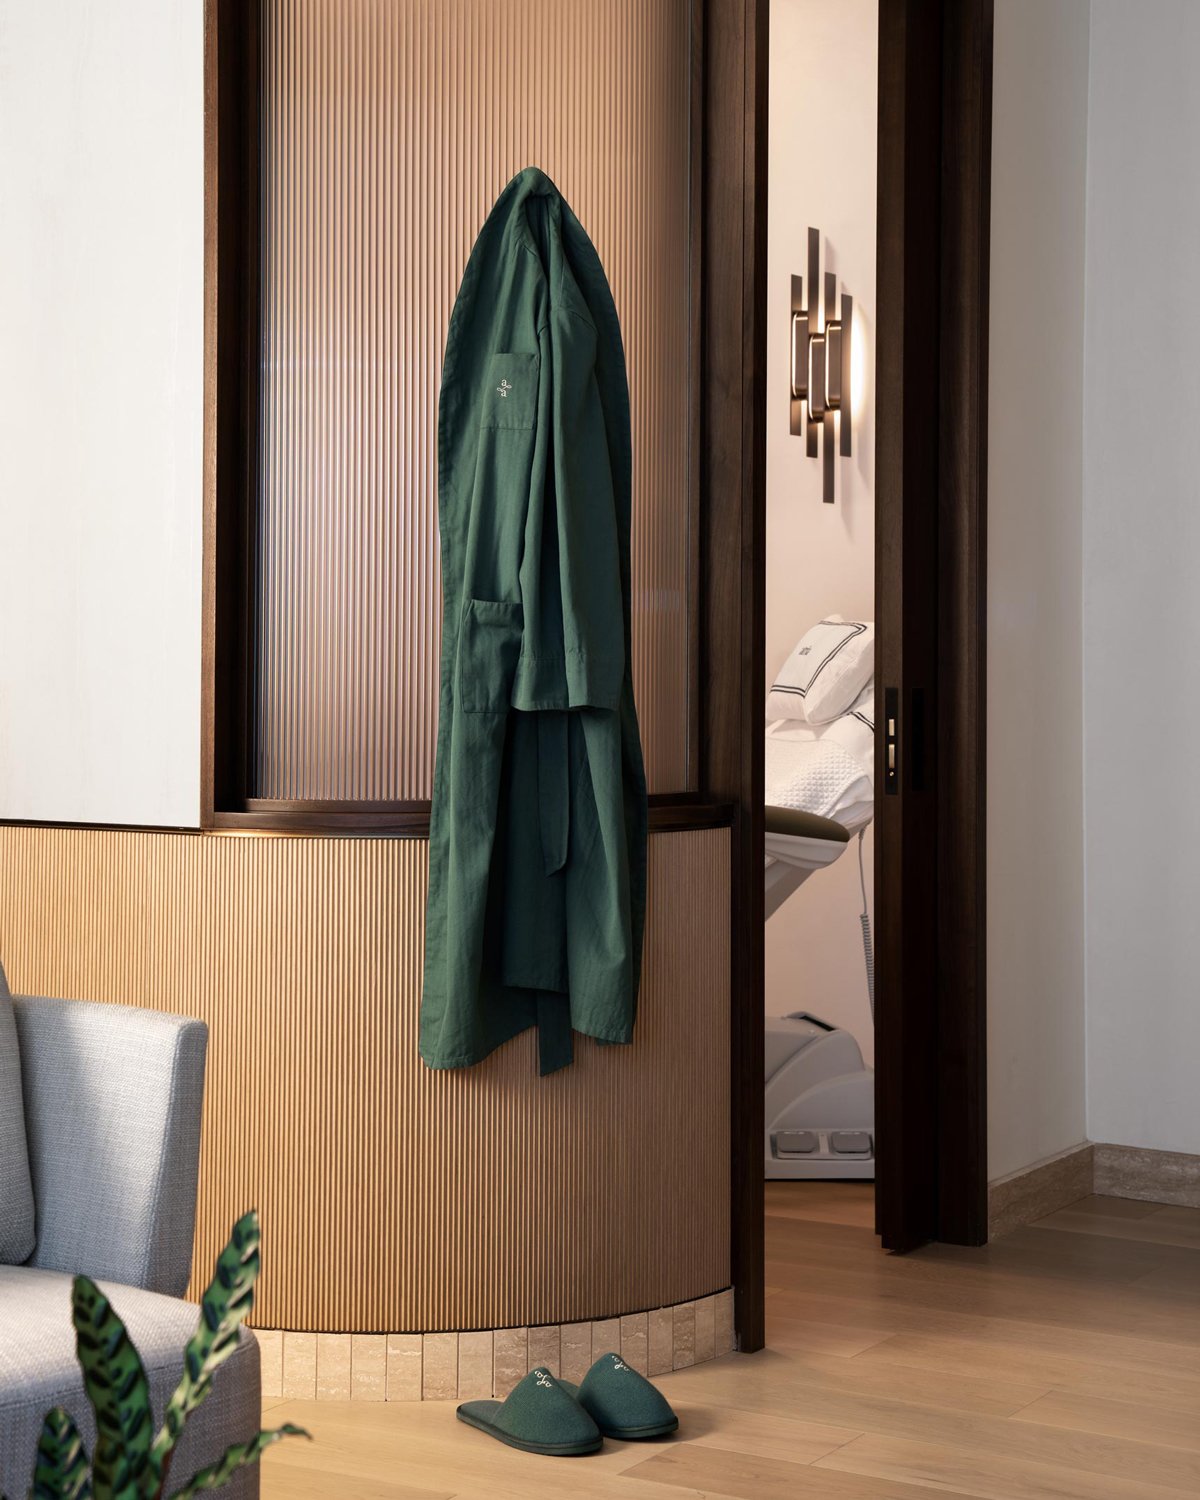 Branded green Atria robe and comfortable slippers in a healthy spa environment with wood floors and wall paneling. 